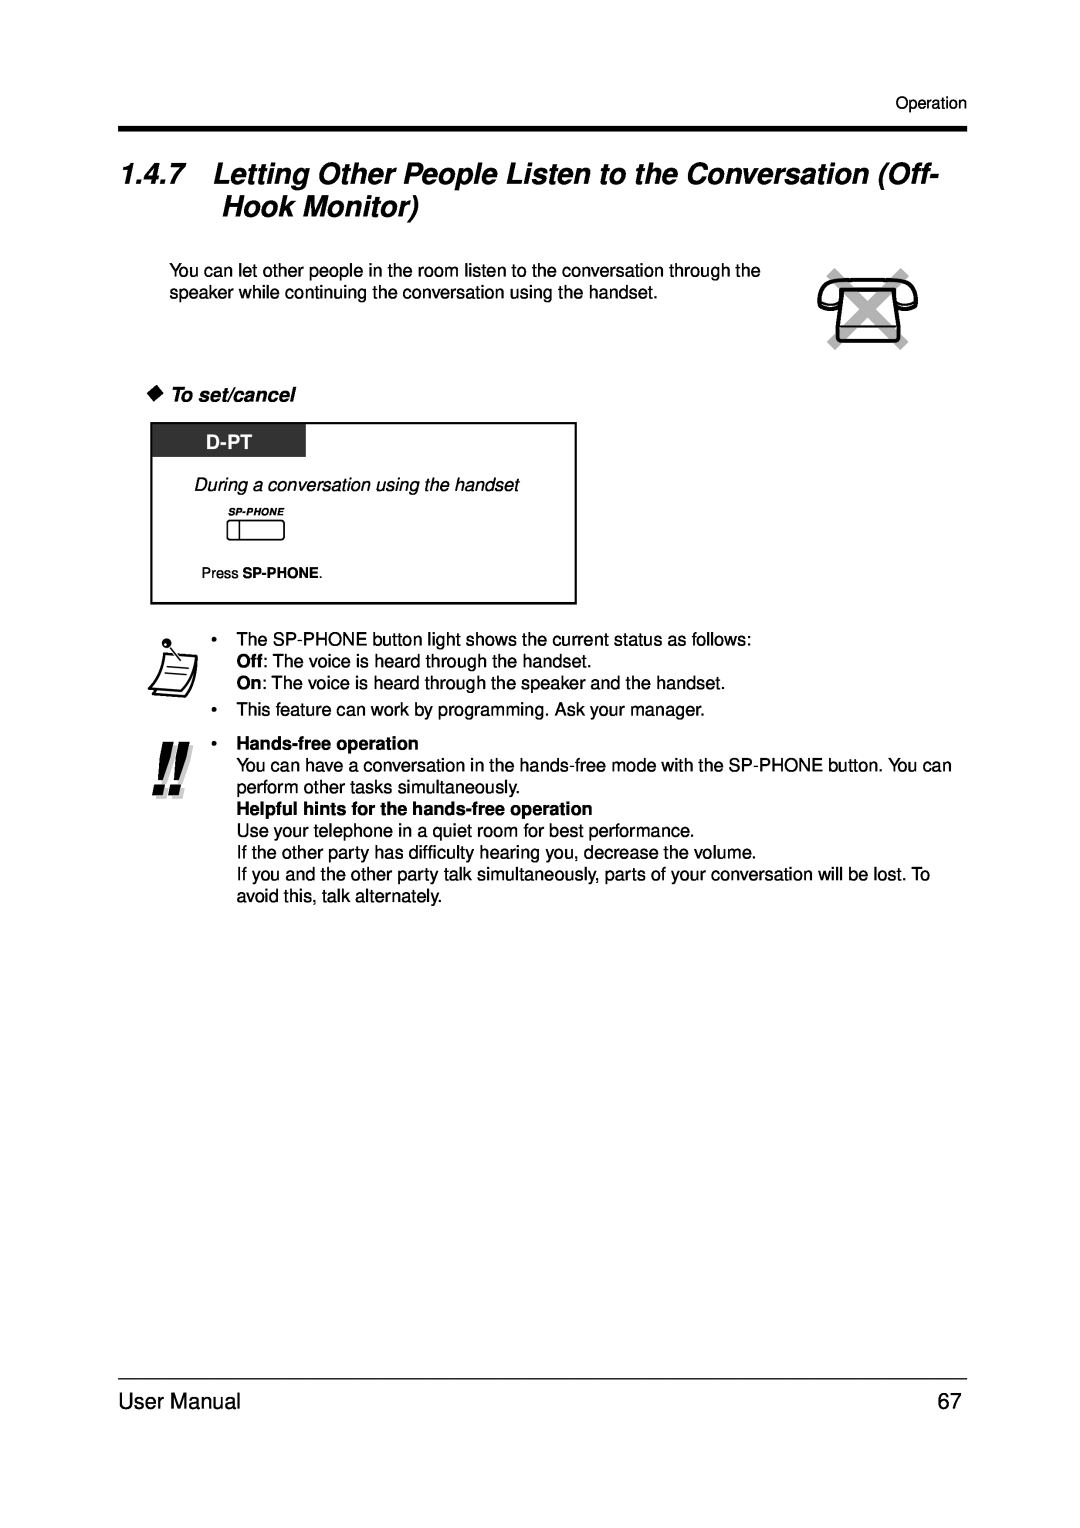 Panasonic KX-TDA200 user manual To set/cancel, D-Pt, During a conversation using the handset, Hands-freeoperation 